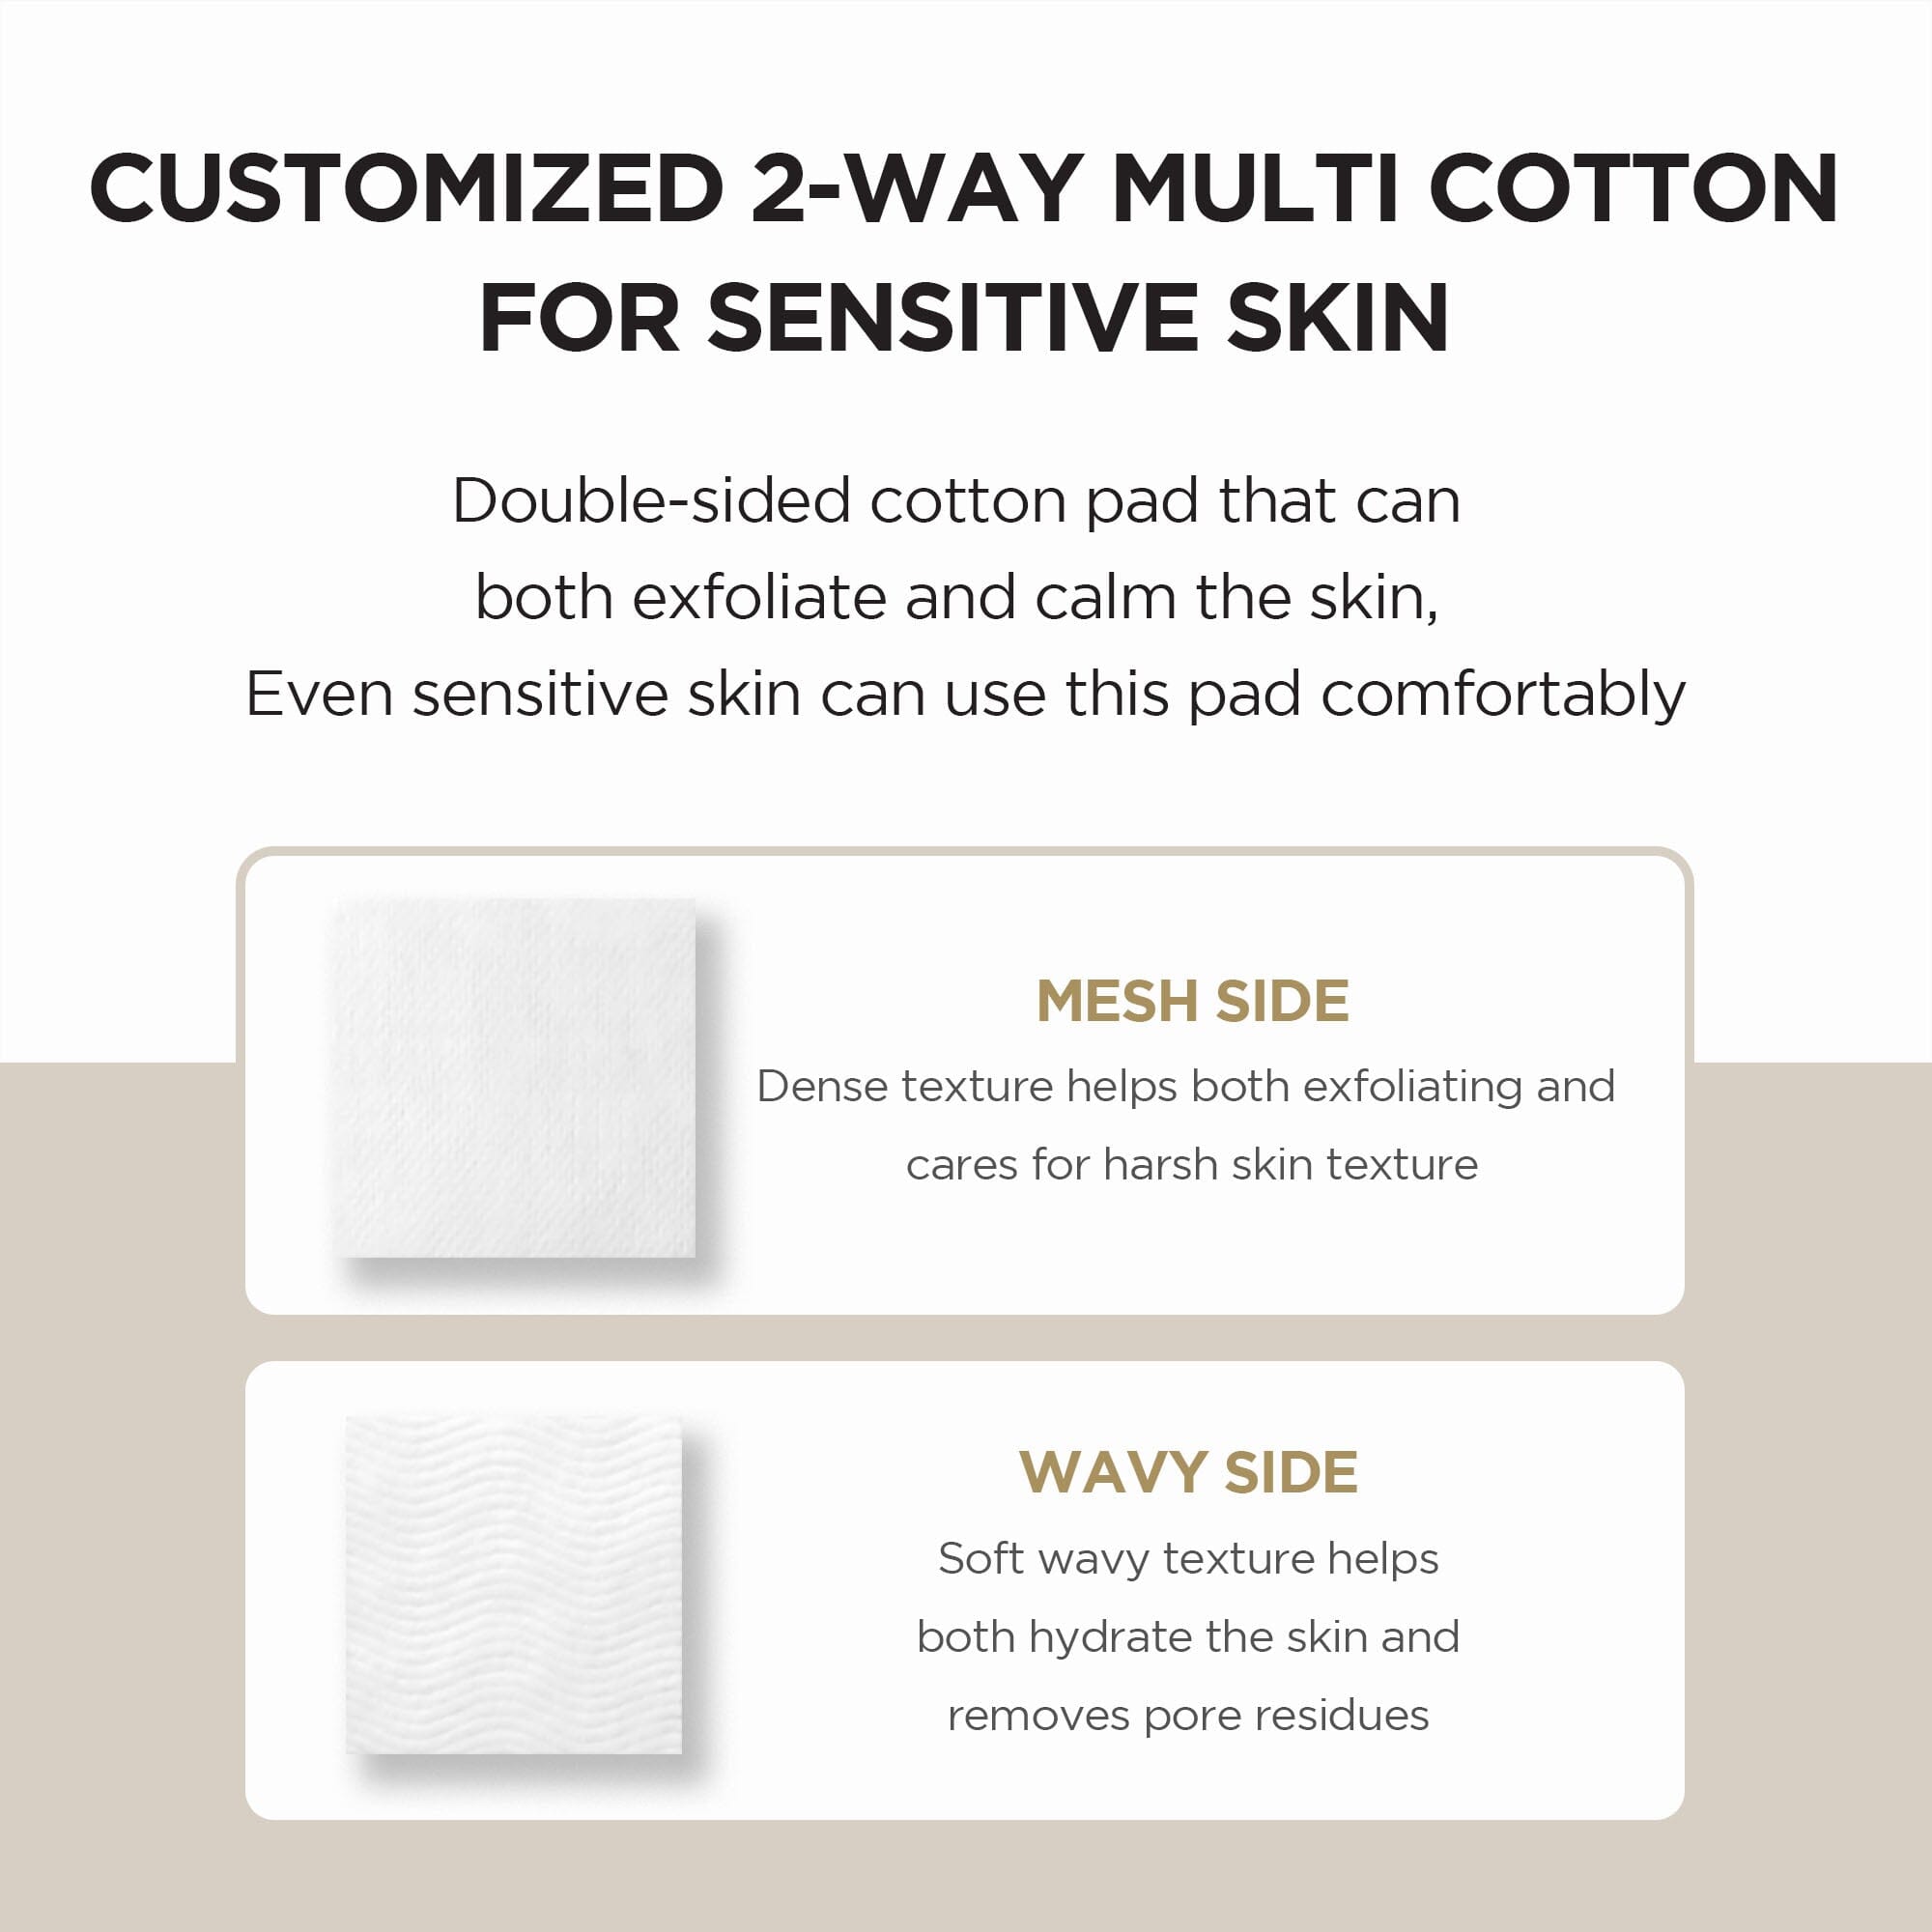 SKIN1004 Madagascar Centella Pure Cotton Pad, at Orion Beauty. SKIN1004 Official Sole Authorized Retailer in Sri Lanka!